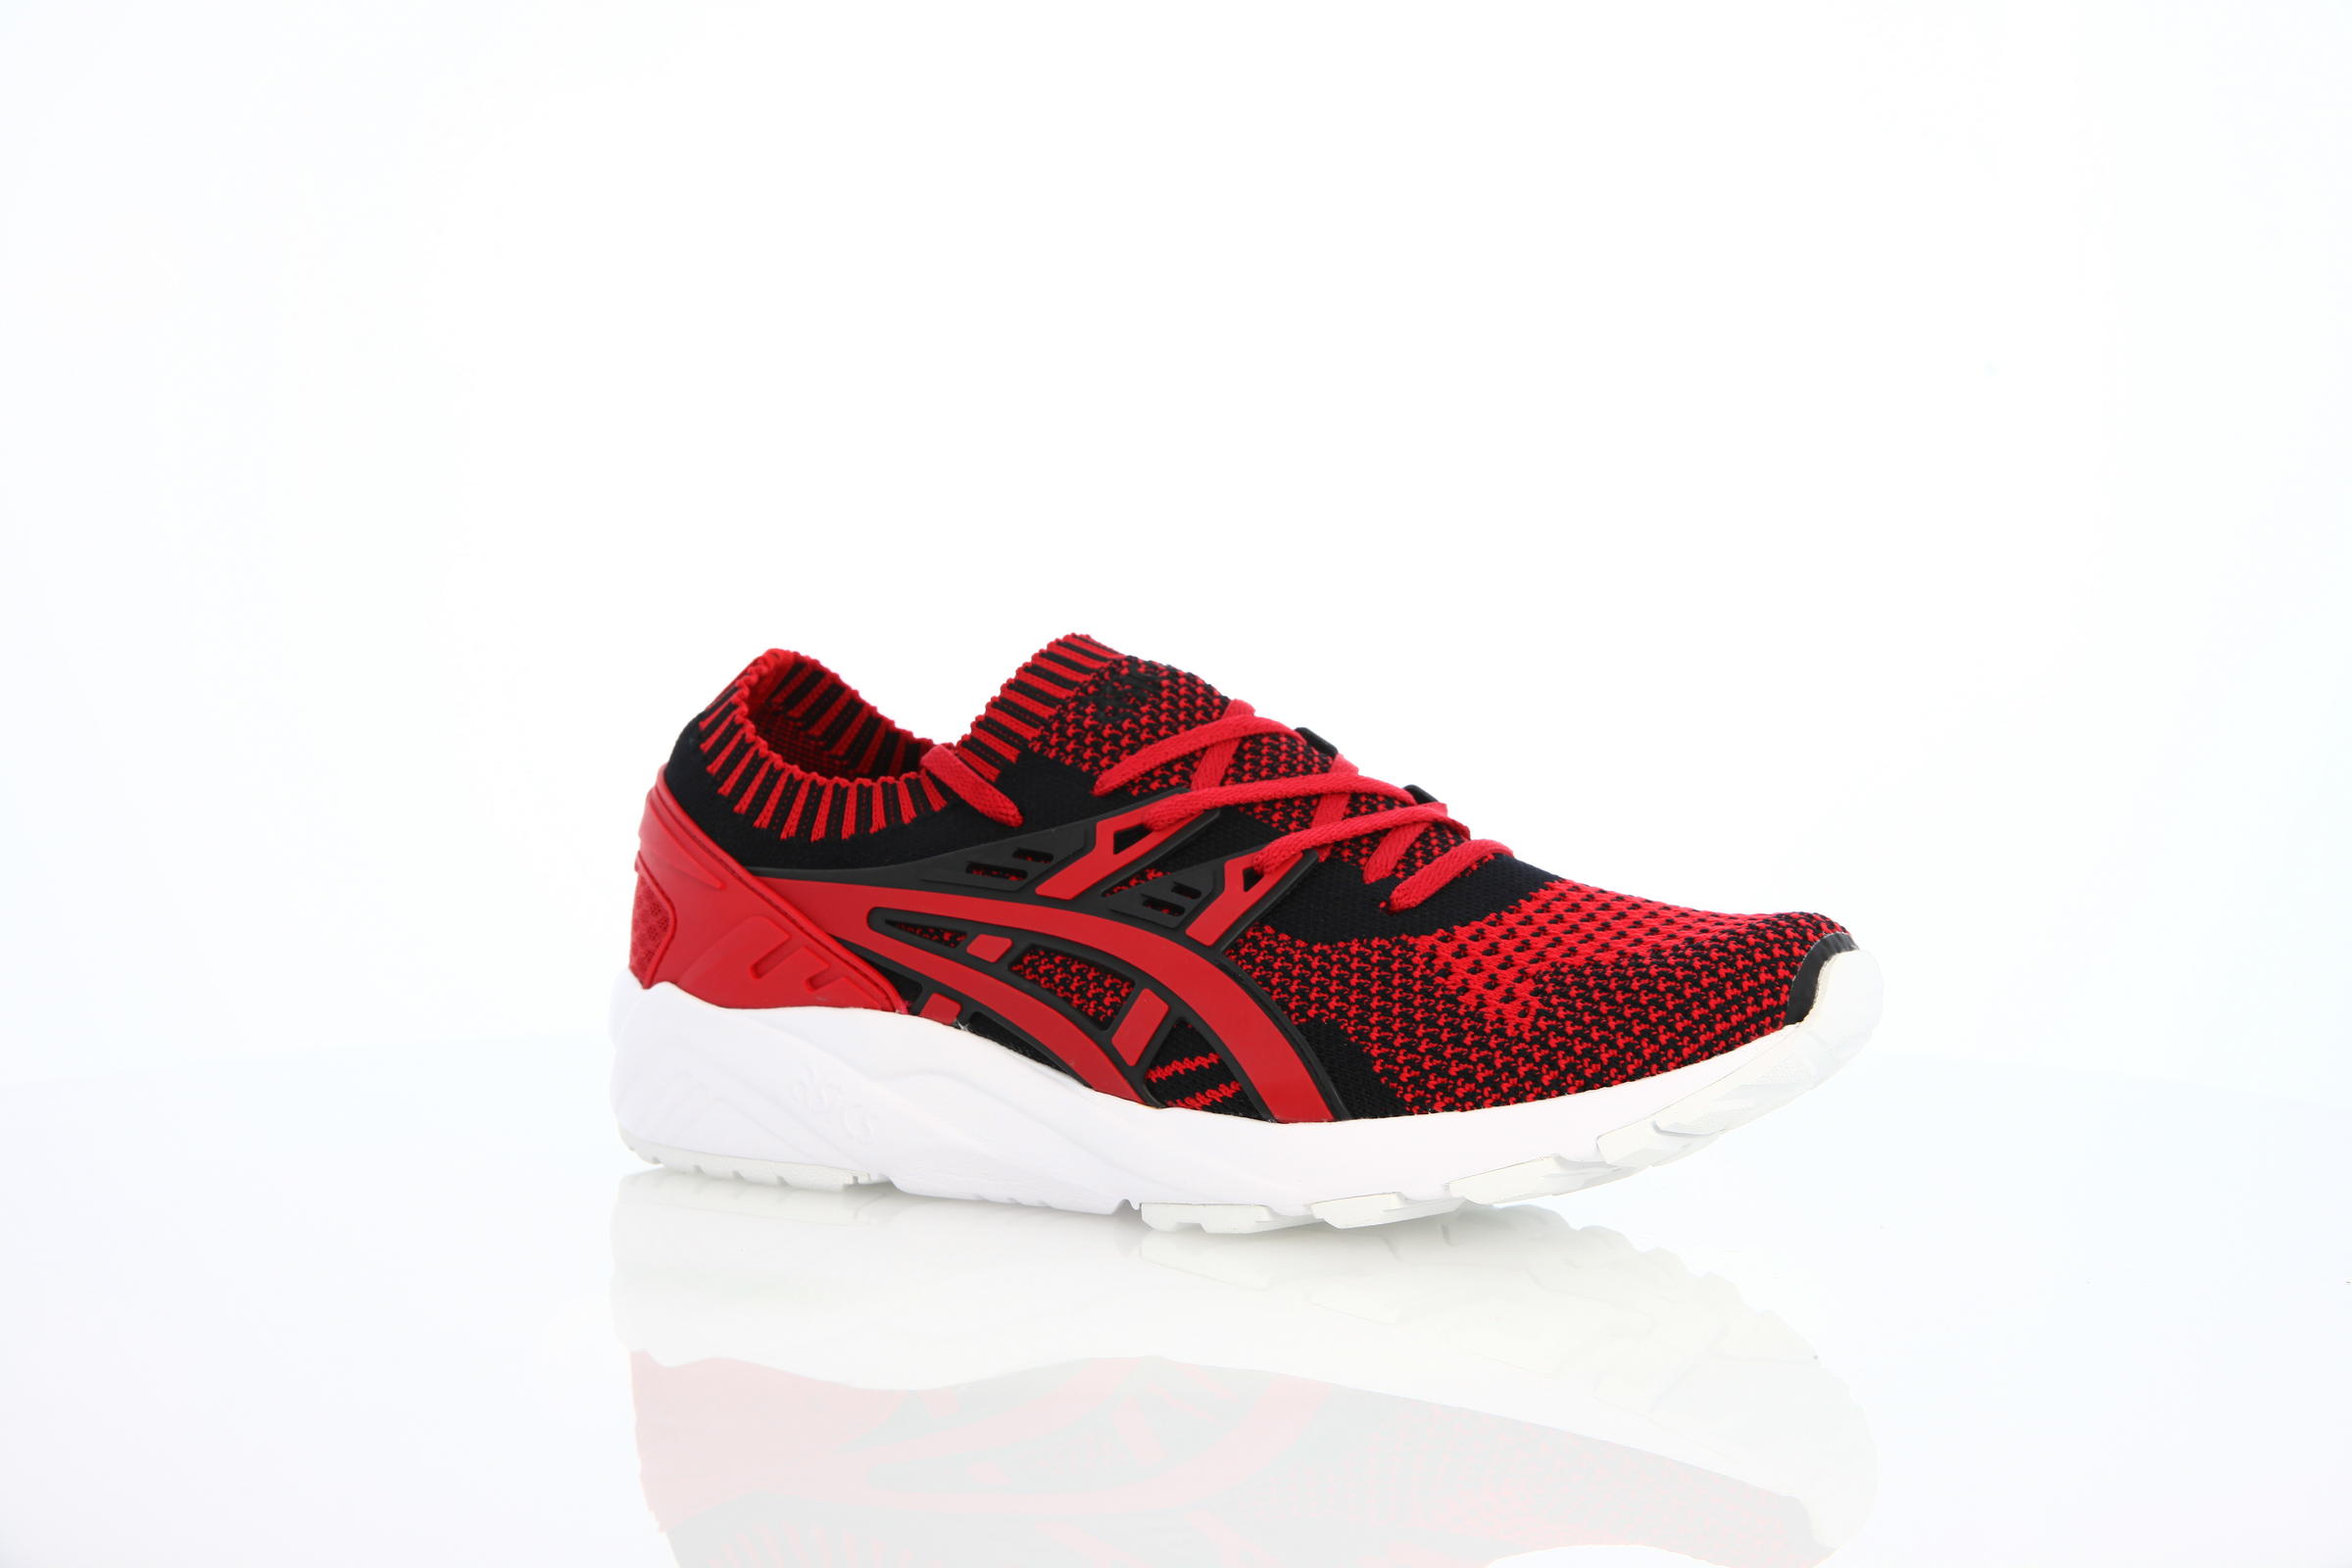 Asics Gel-Kayano Trainer One Piece Knit Pack "True Red"